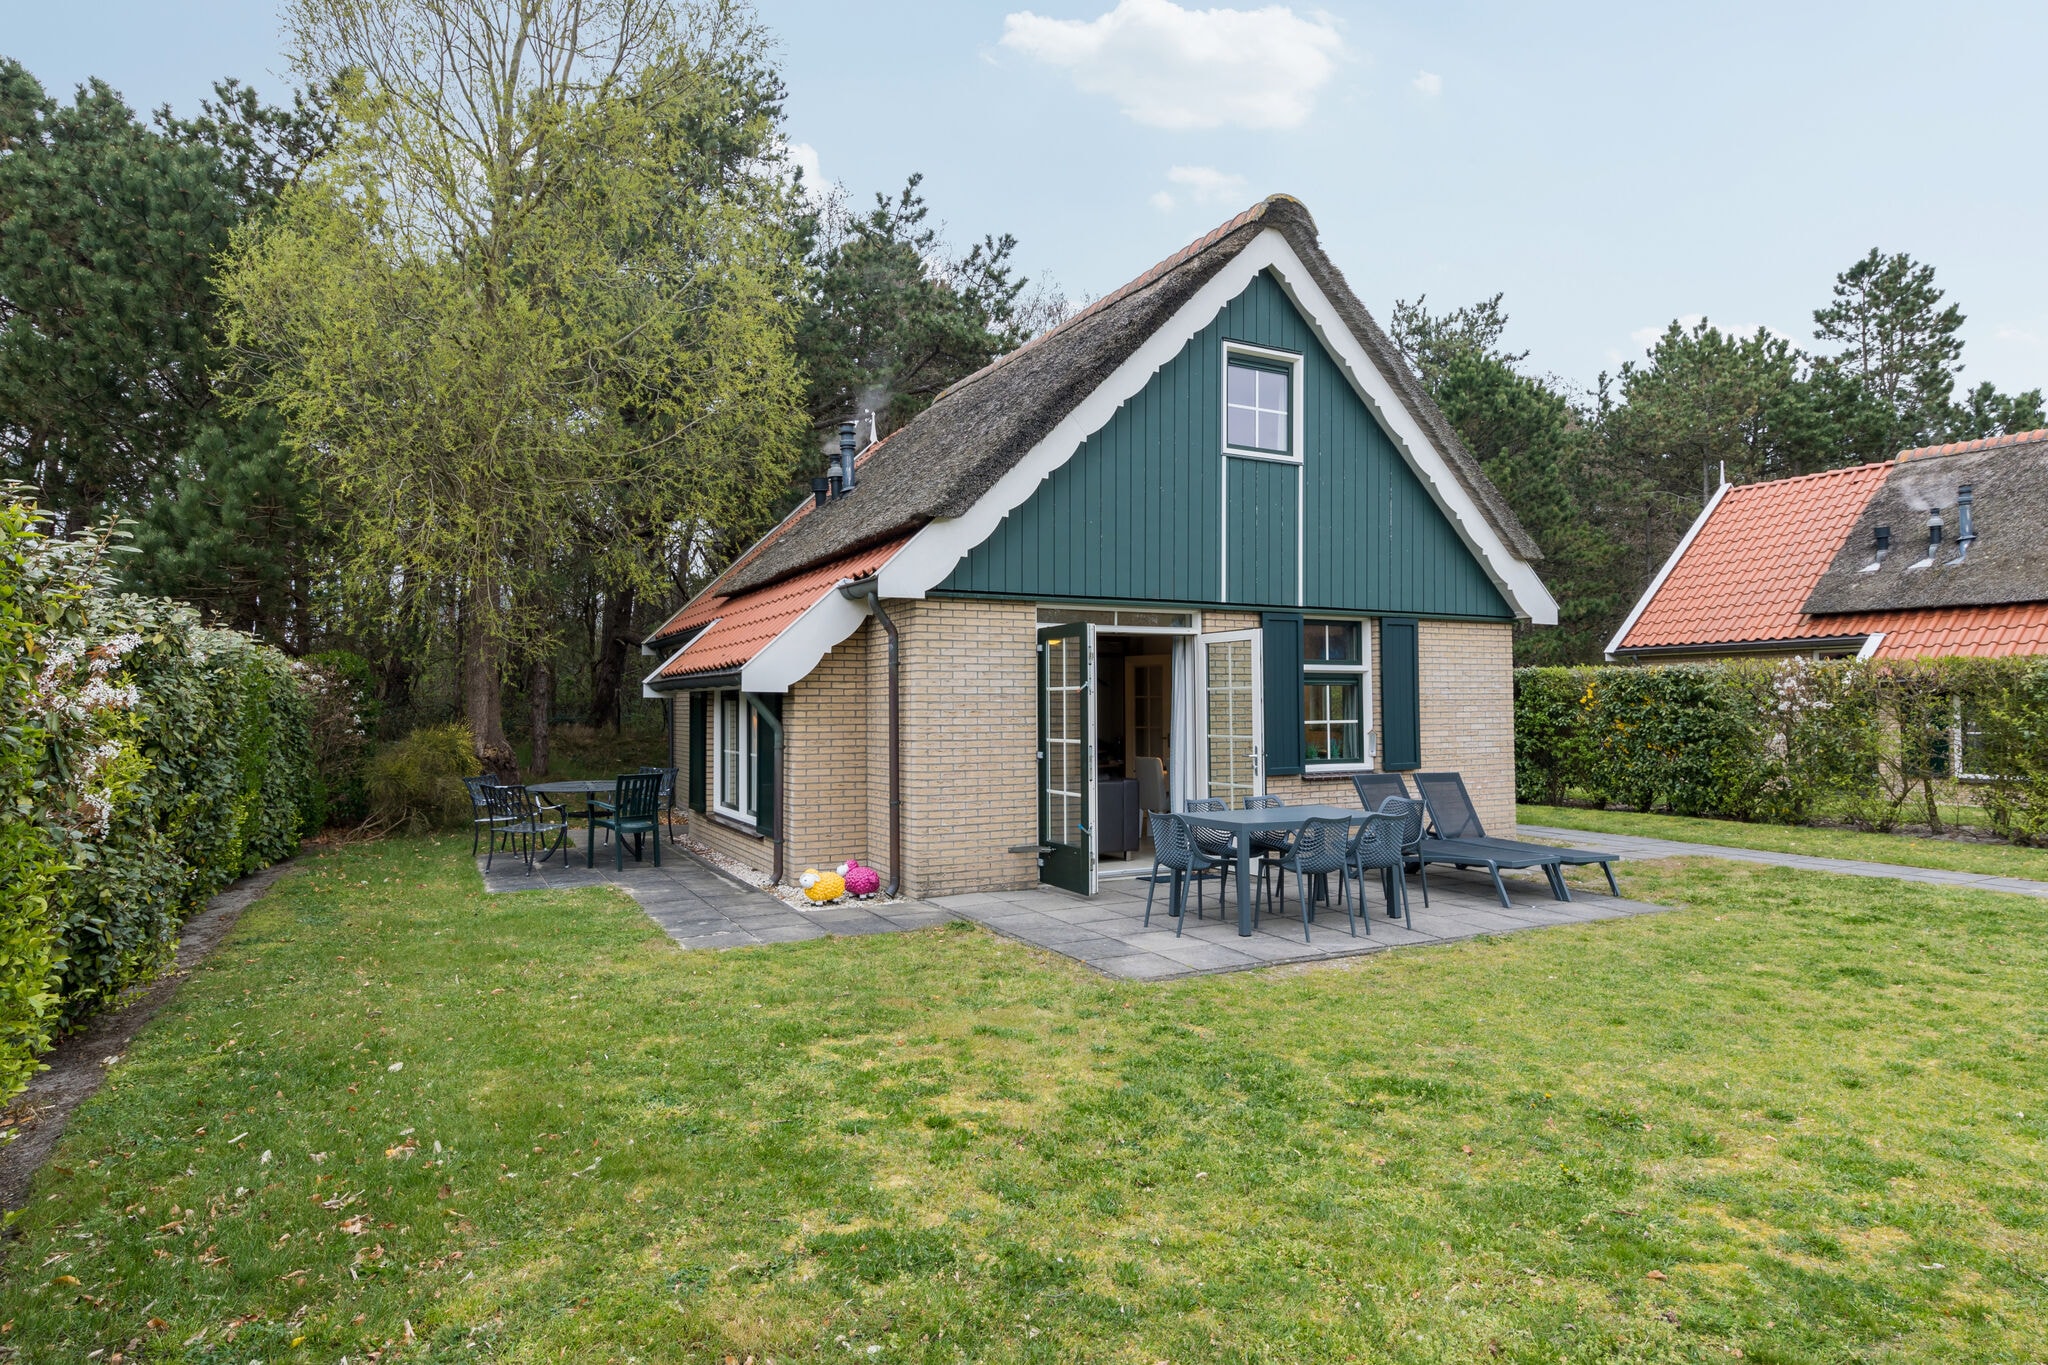 Detached house with dishwasher, 2 km. from the sea on Texel